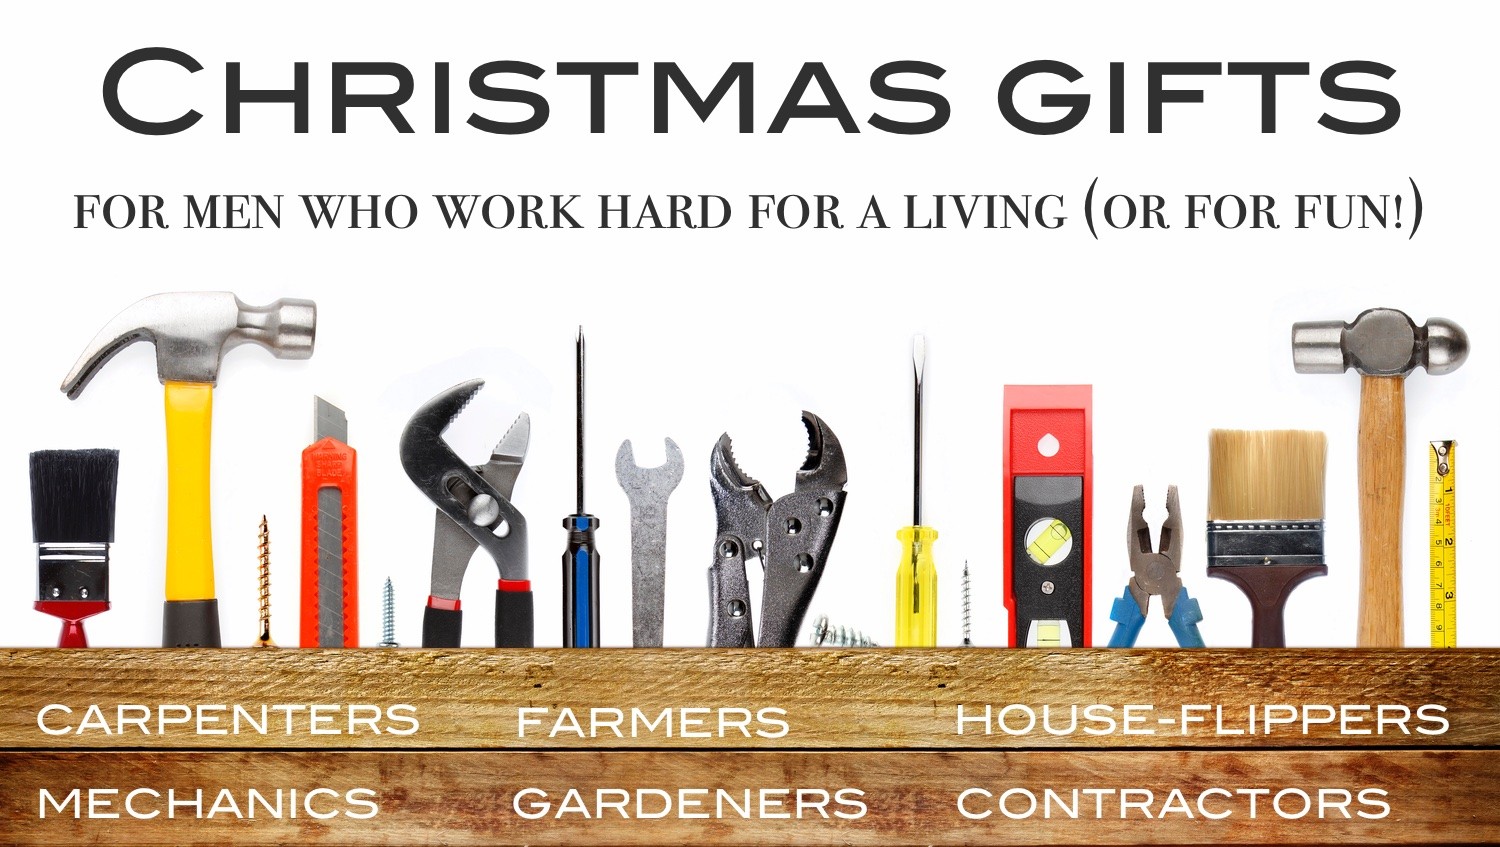 Christmas Gifts For Men Who Work Hard For A Living - Metropolitan Mama